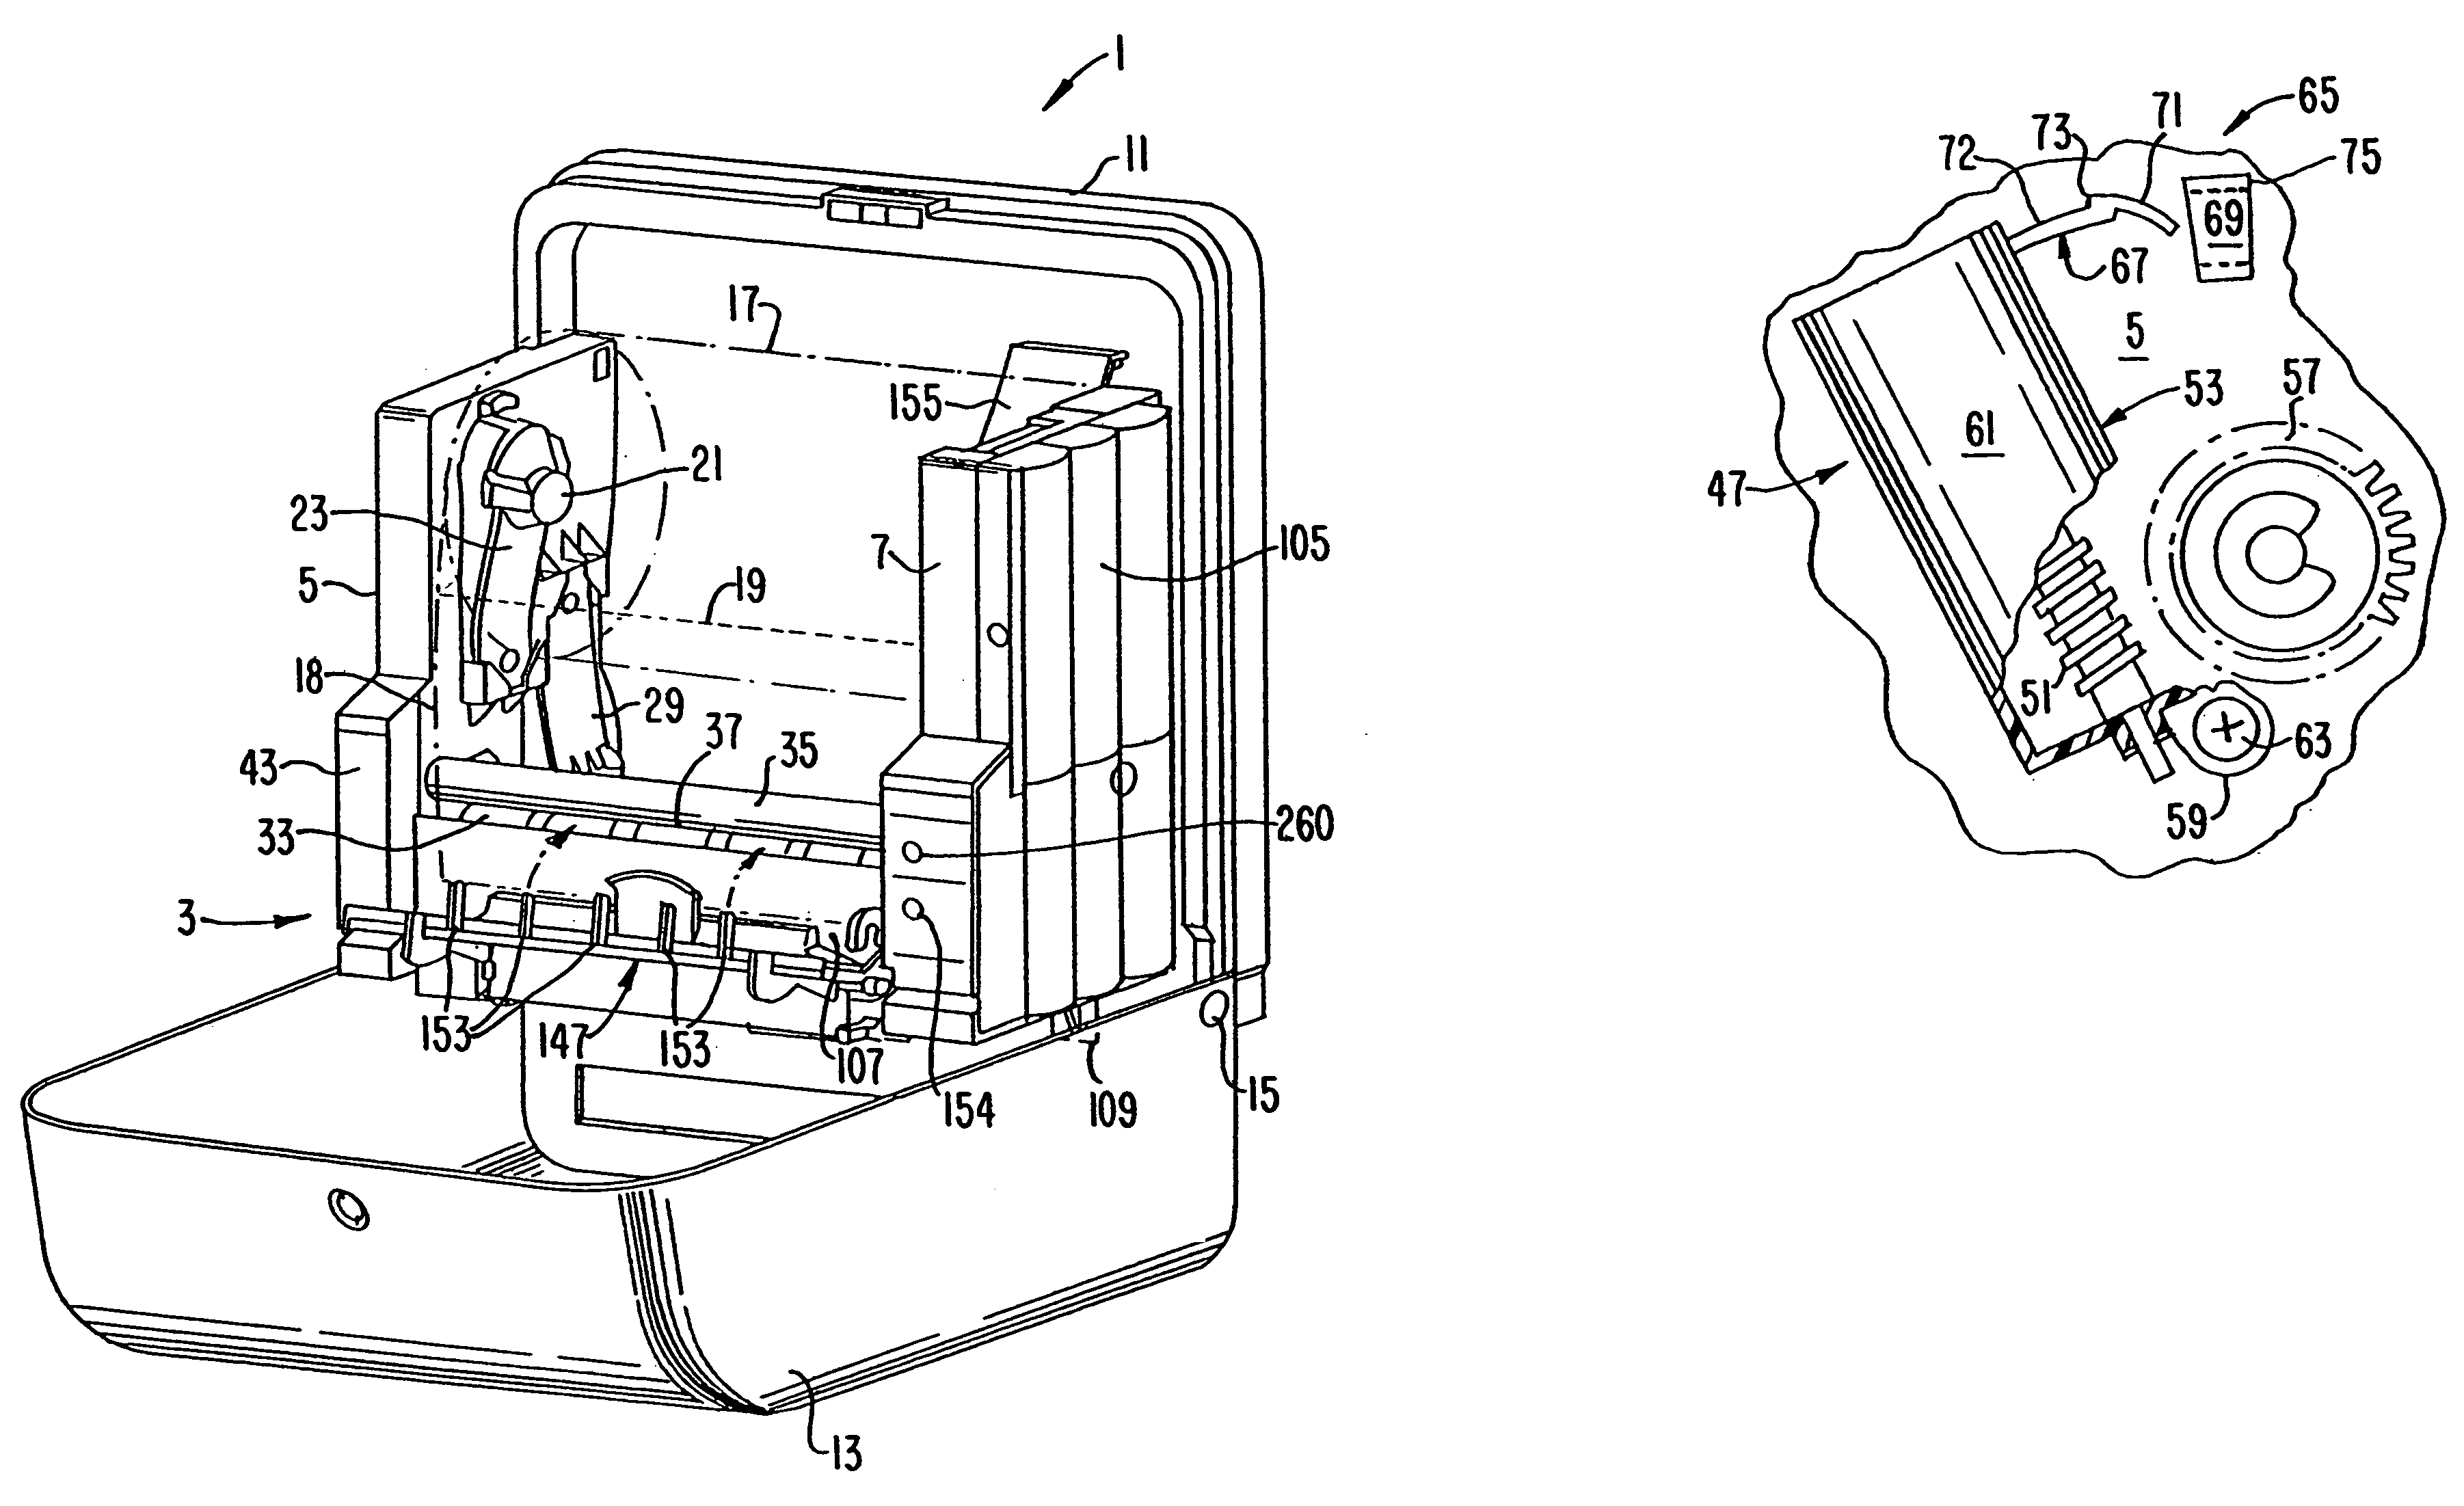 Apparatus and methods usable in connection with dispensing flexible sheet material from a roll